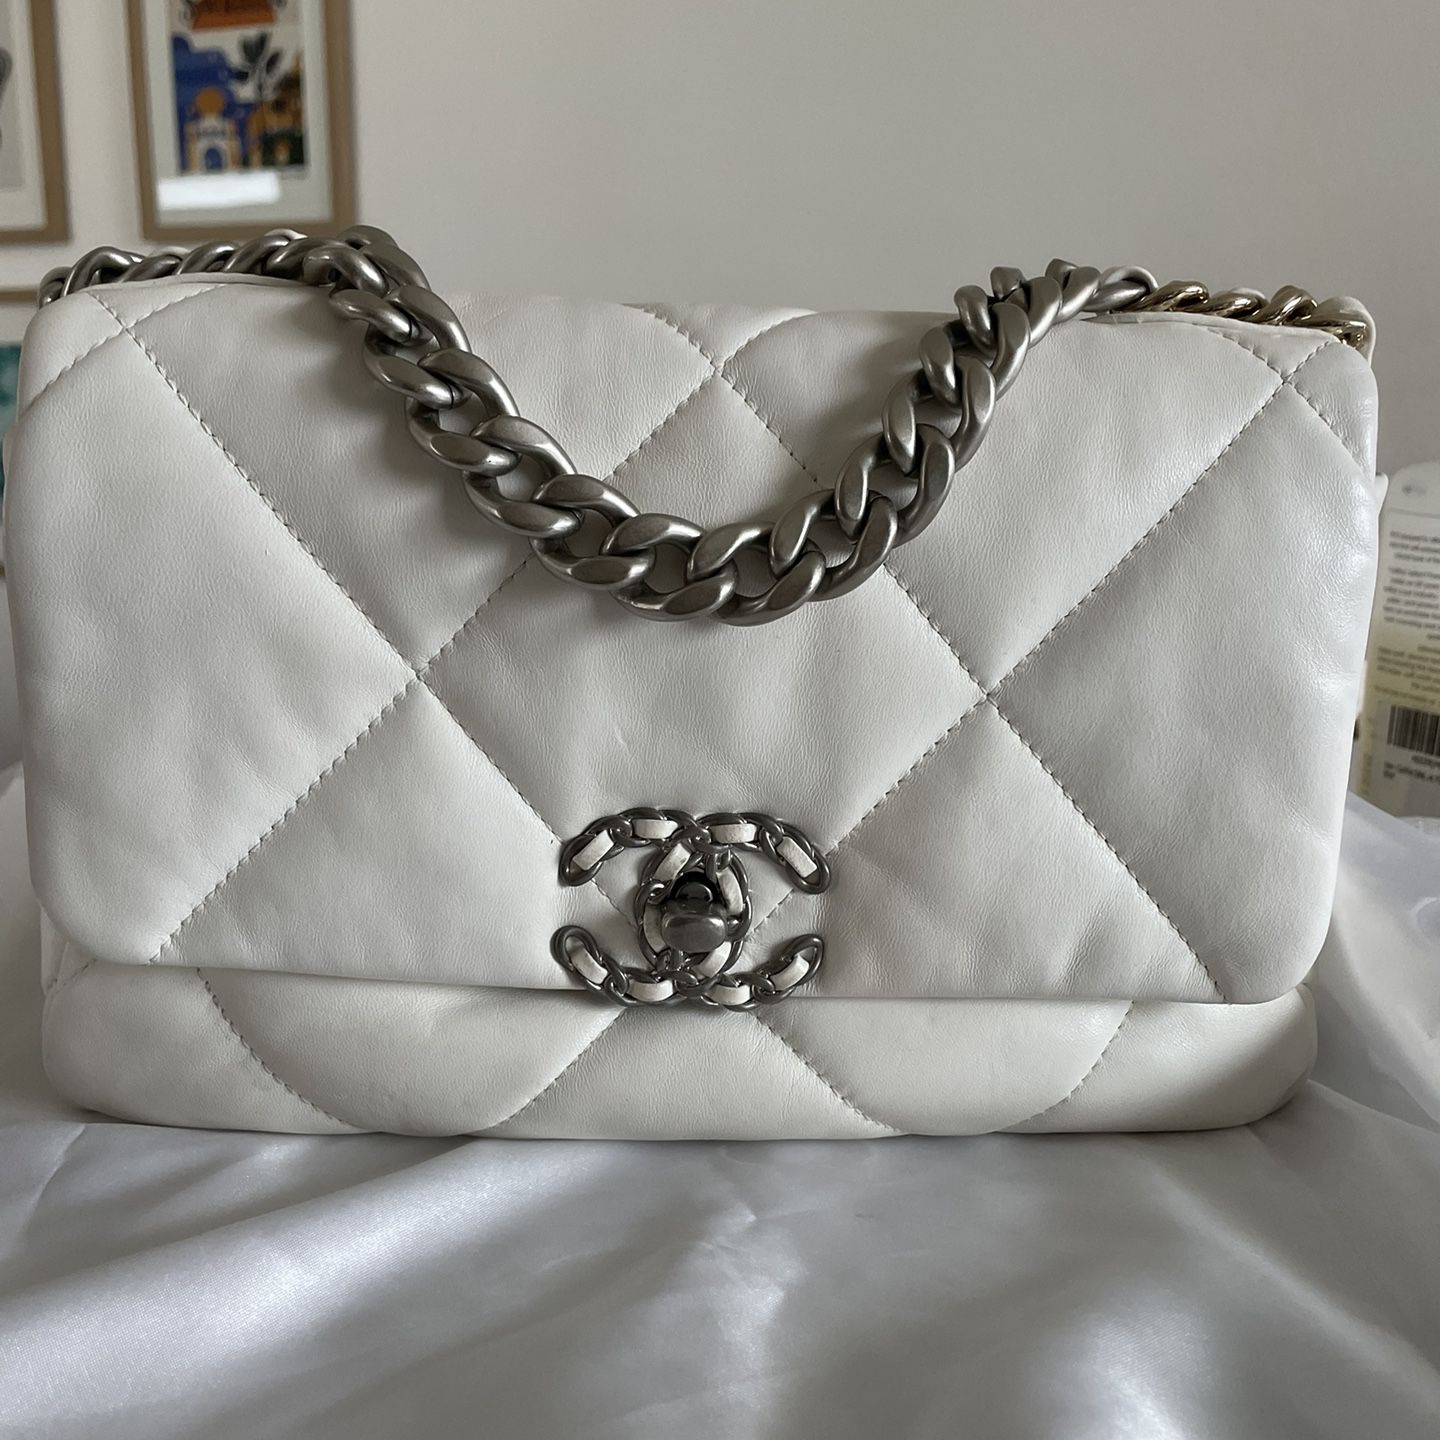 Chanel Small Le boy Bag for Sale in Los Angeles, CA - OfferUp